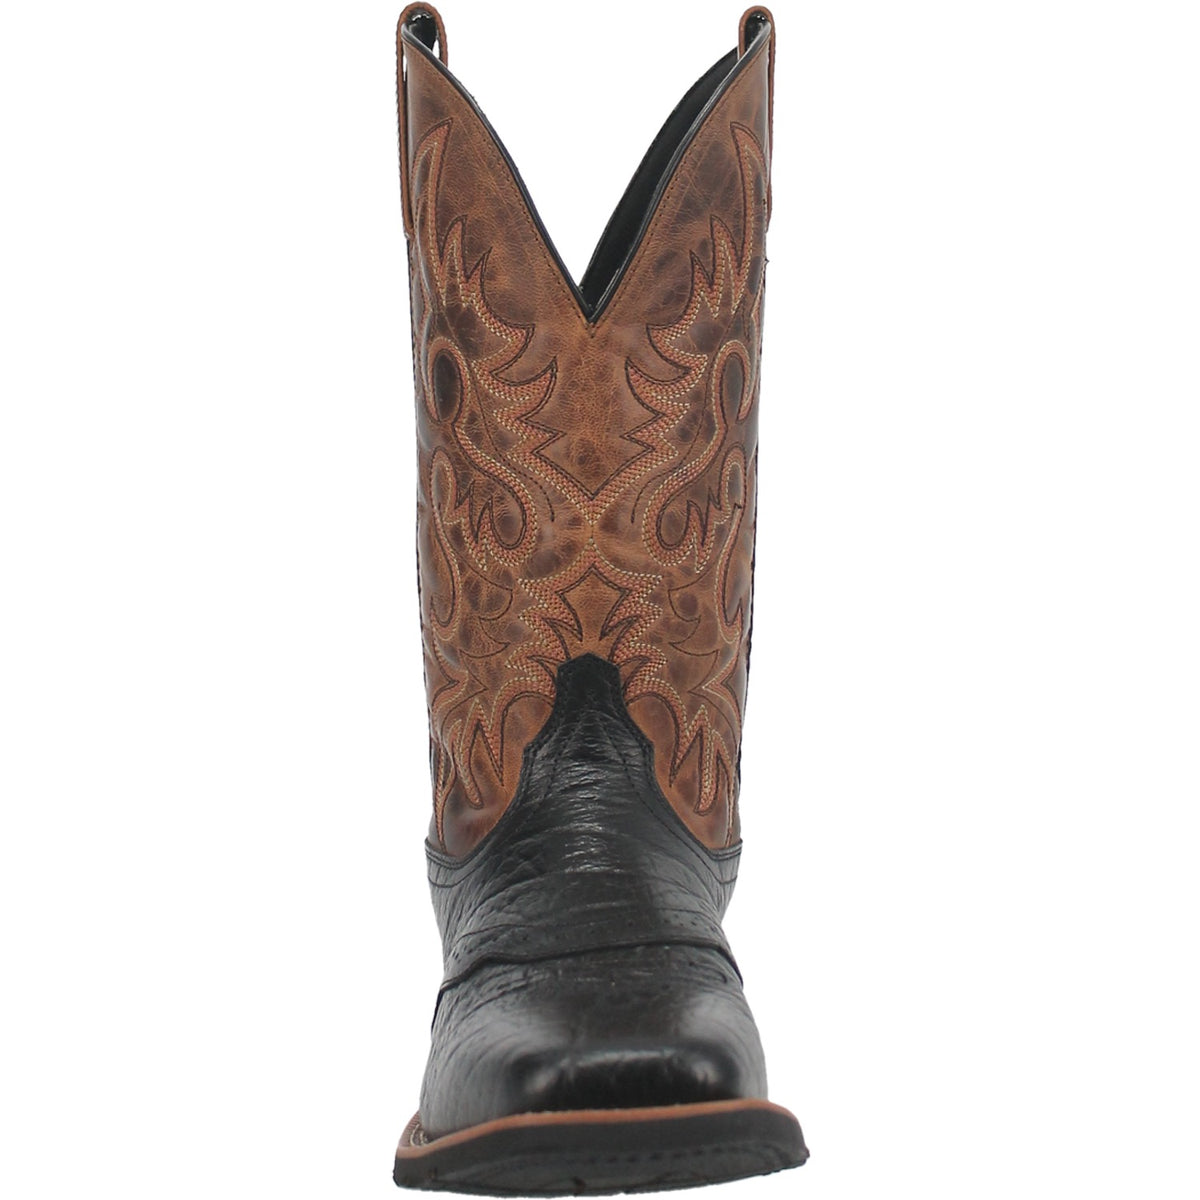 TOPEKA LEATHER BOOT Cover